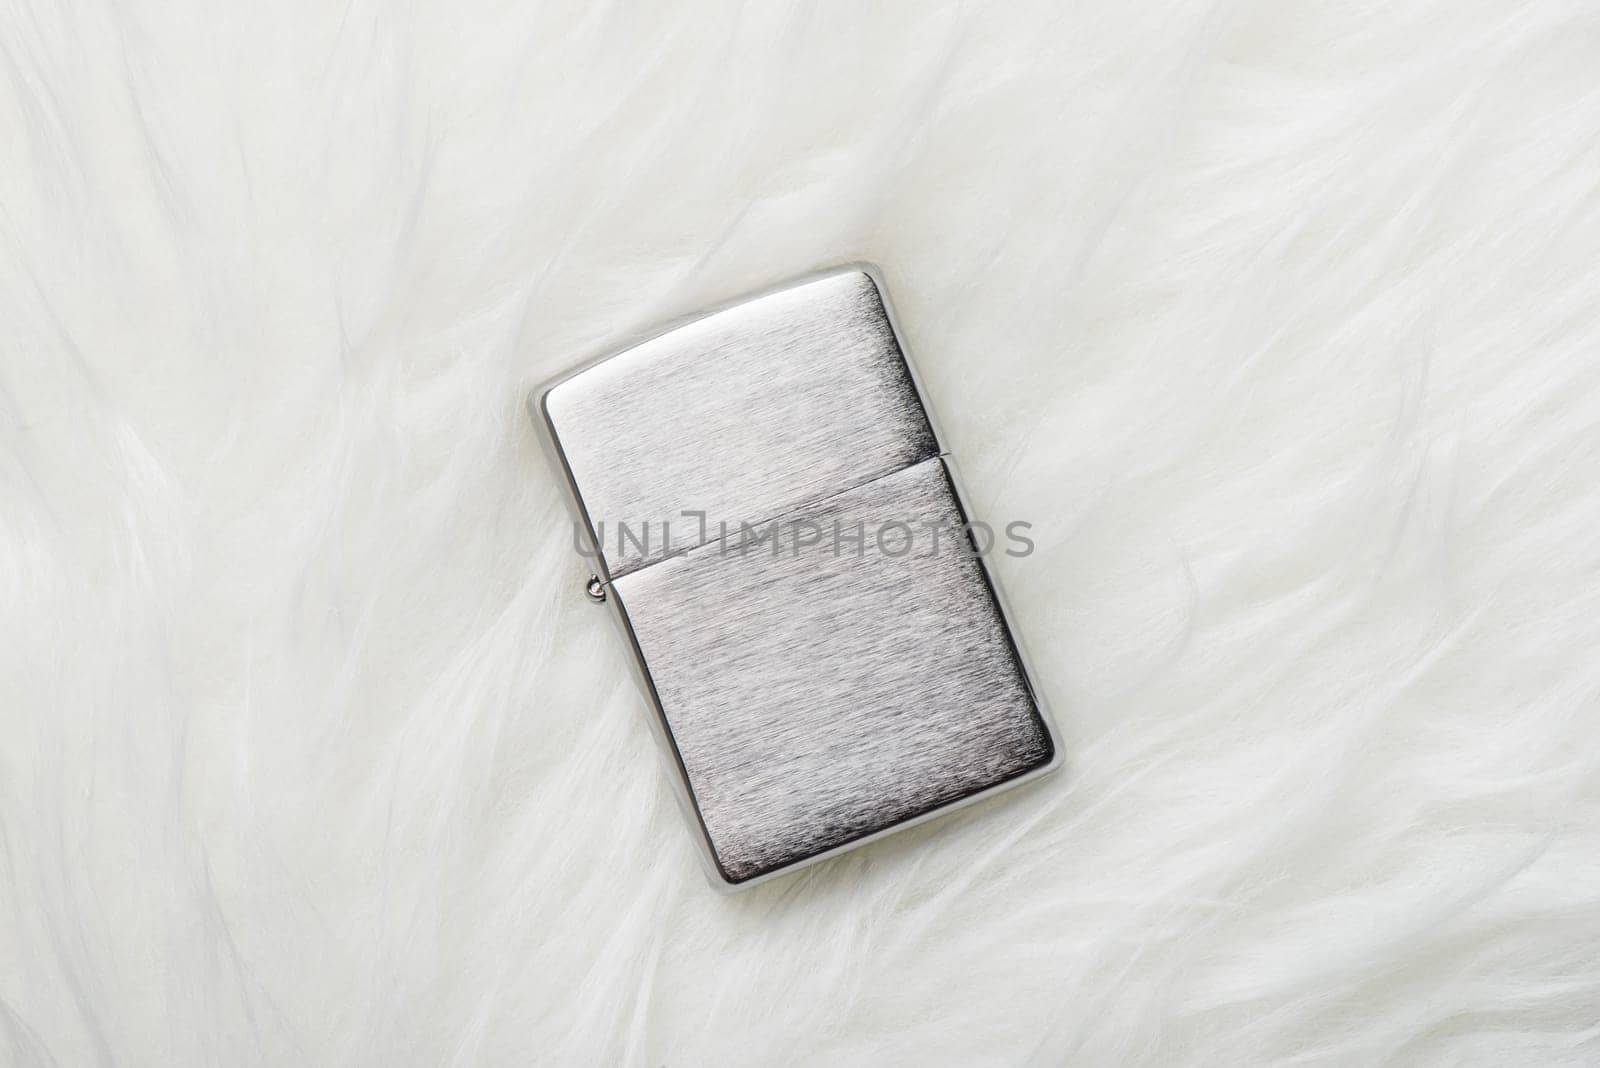 brushed chrome lighter with windproof isolated over white fur.